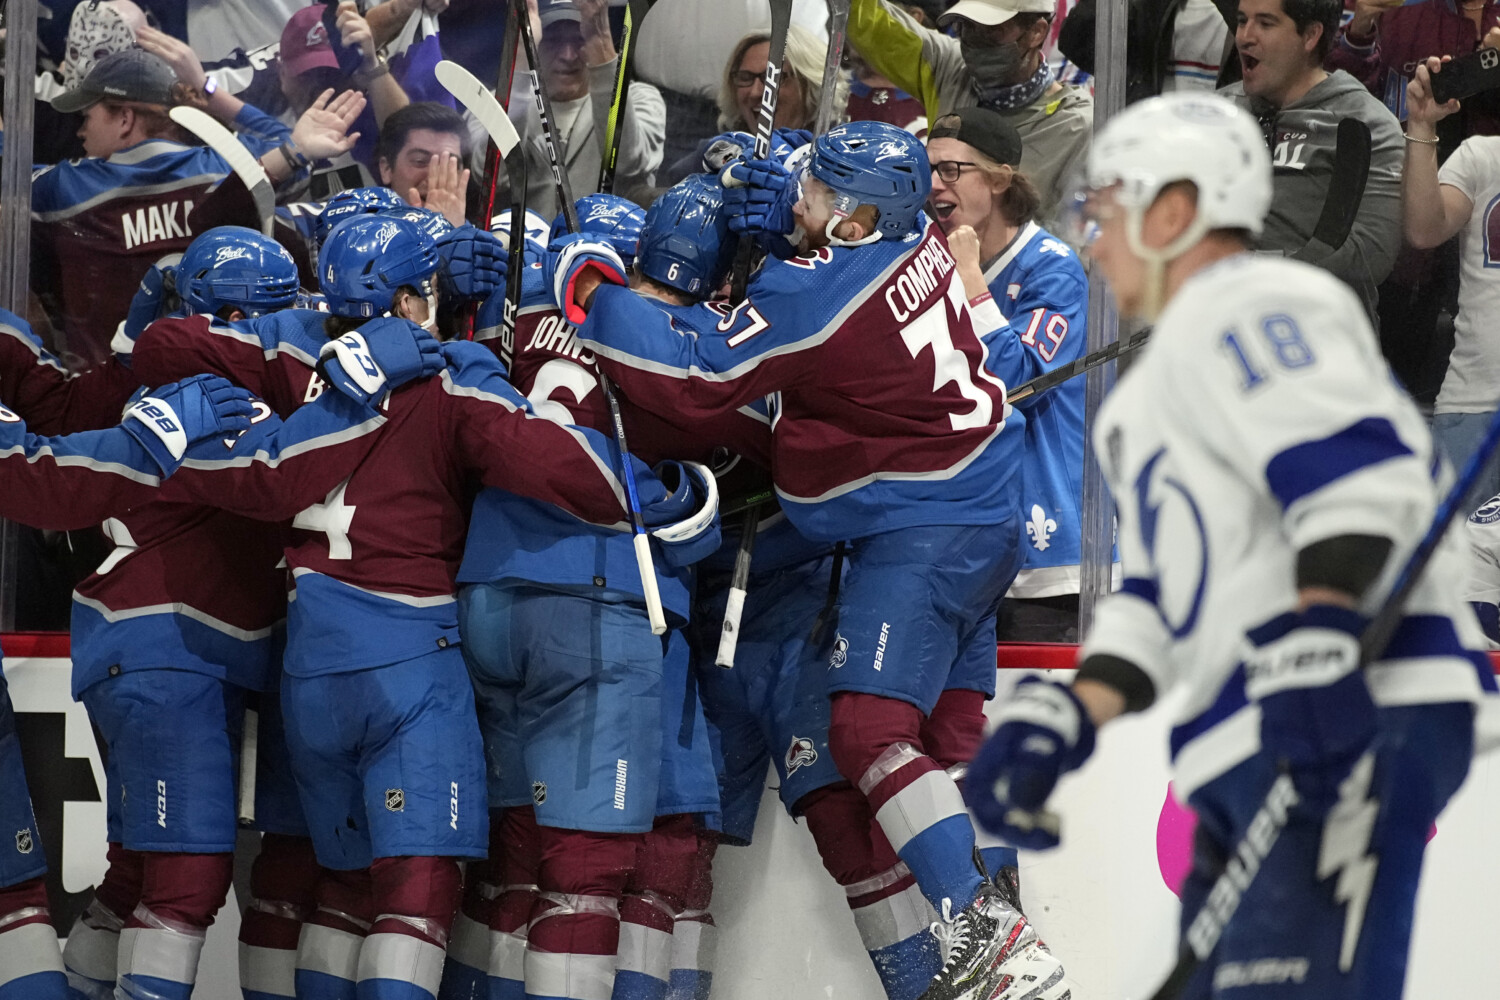 Stanley Cup Final schedule: Tampa Bay Lightning vs. Colorado Avalanche